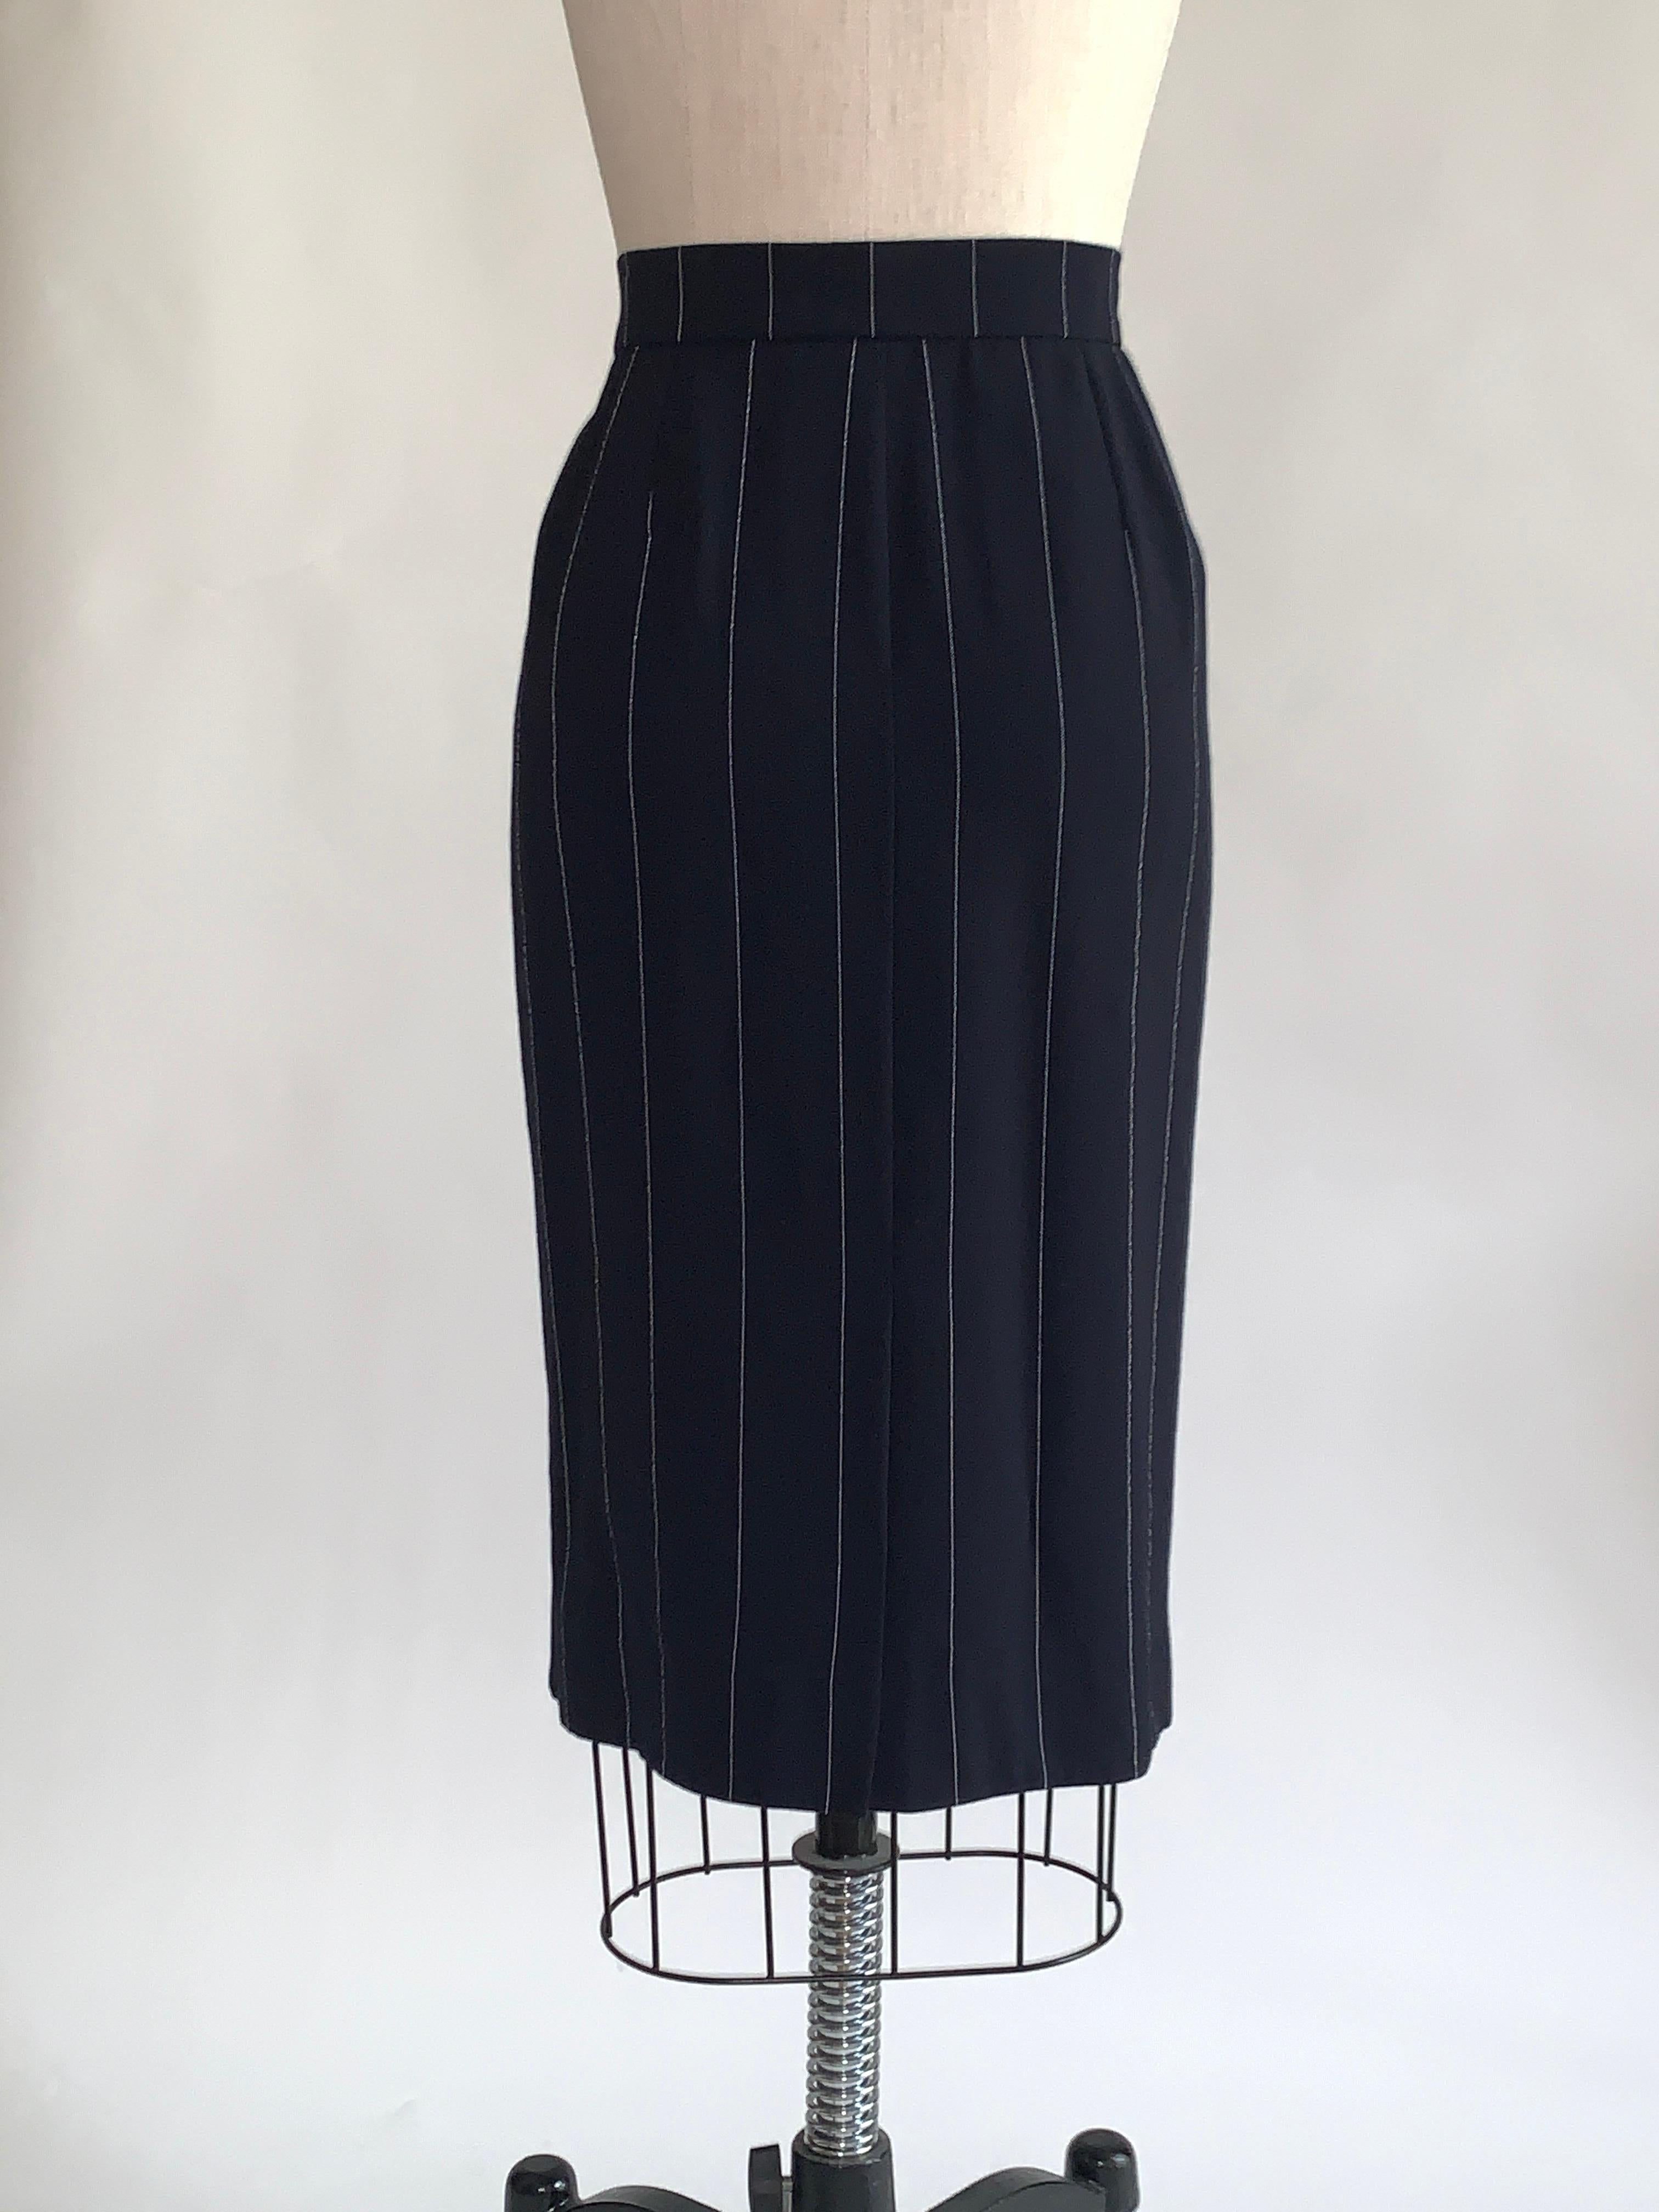 1990s vintage Encore by Yves Saint Laurent pencil skirt in navy blue with skinny white pinstripe throughout.  Side zip and button closure. Short slit at center back.

60% wool, 39% rayon, 1% polyester. 
Fully lined in 55% acetate, 45% cuprous.

Made